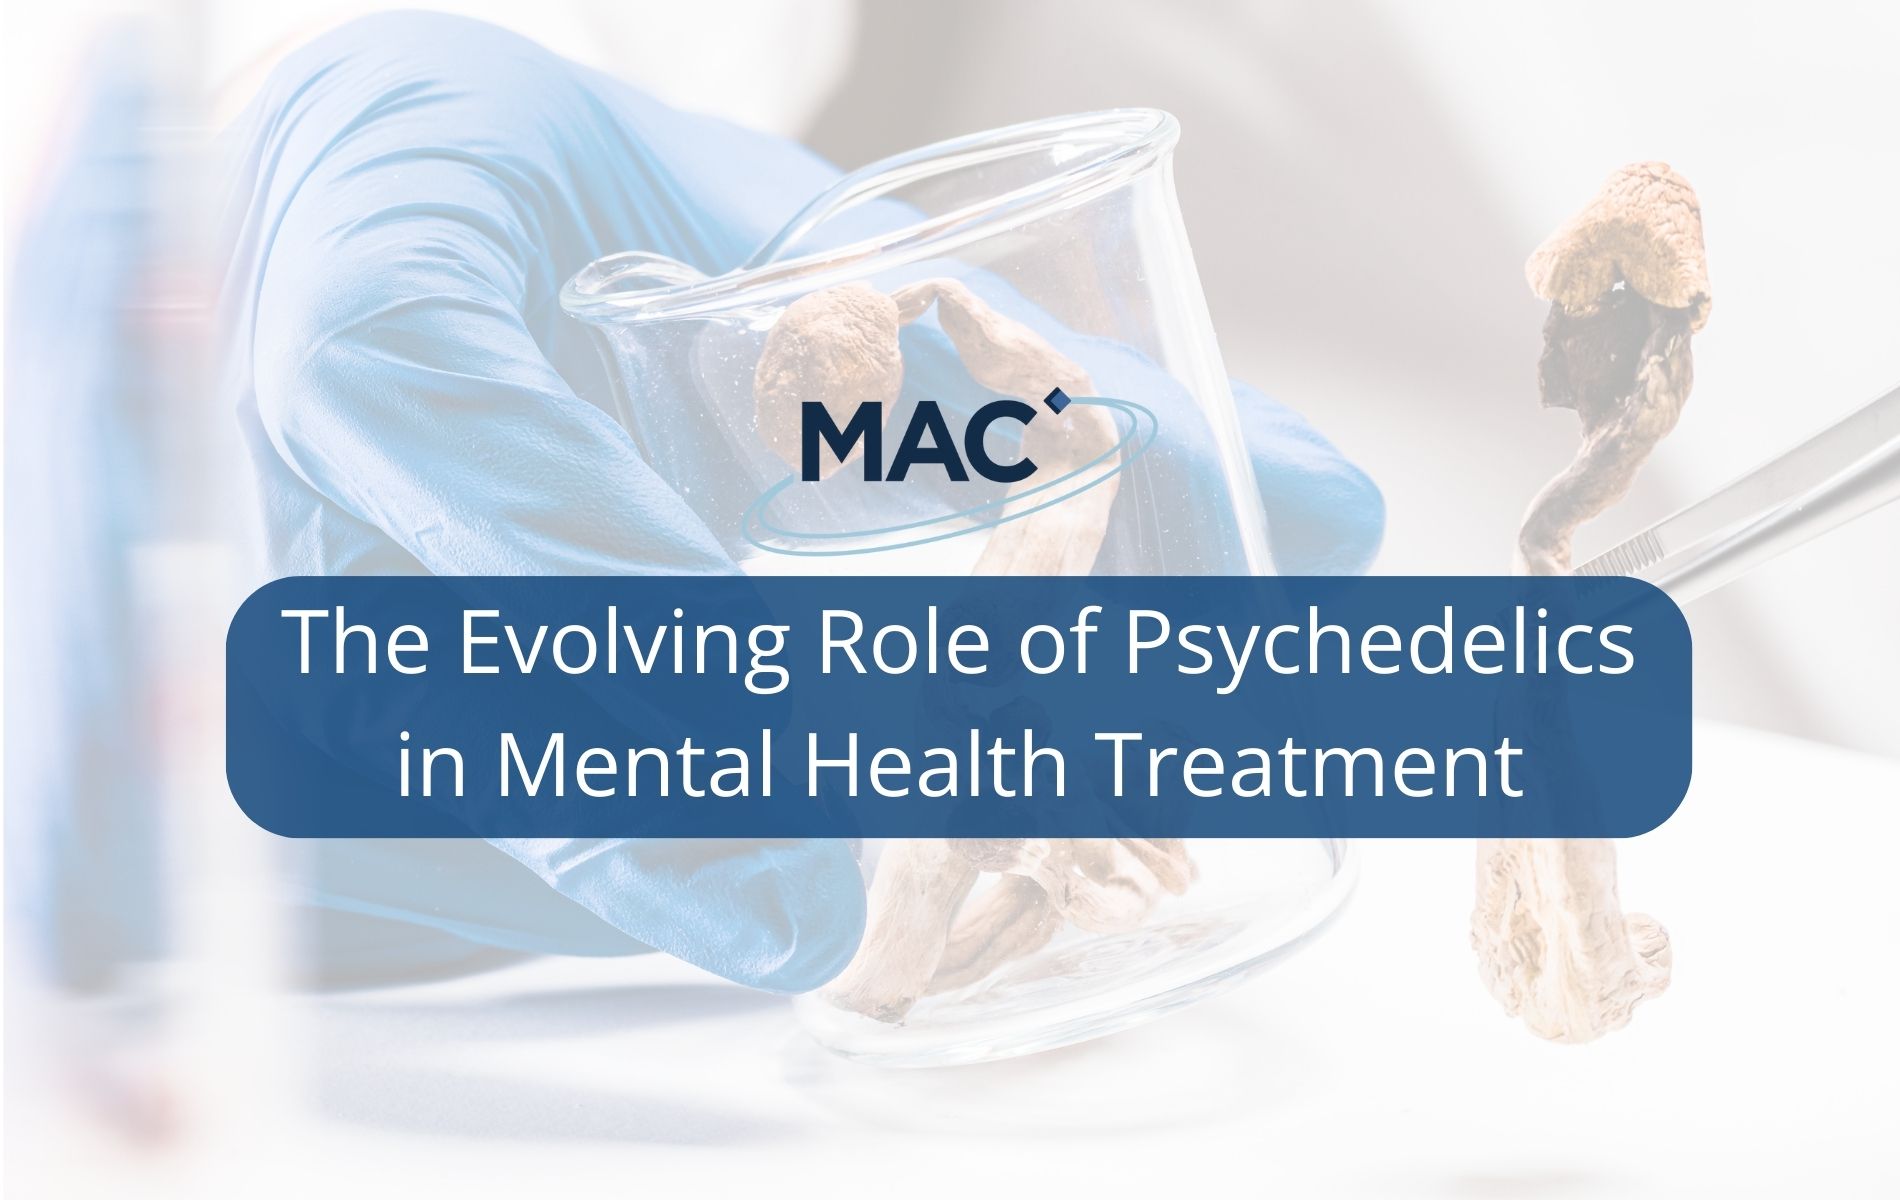 Psychedelics - treating mental disorders